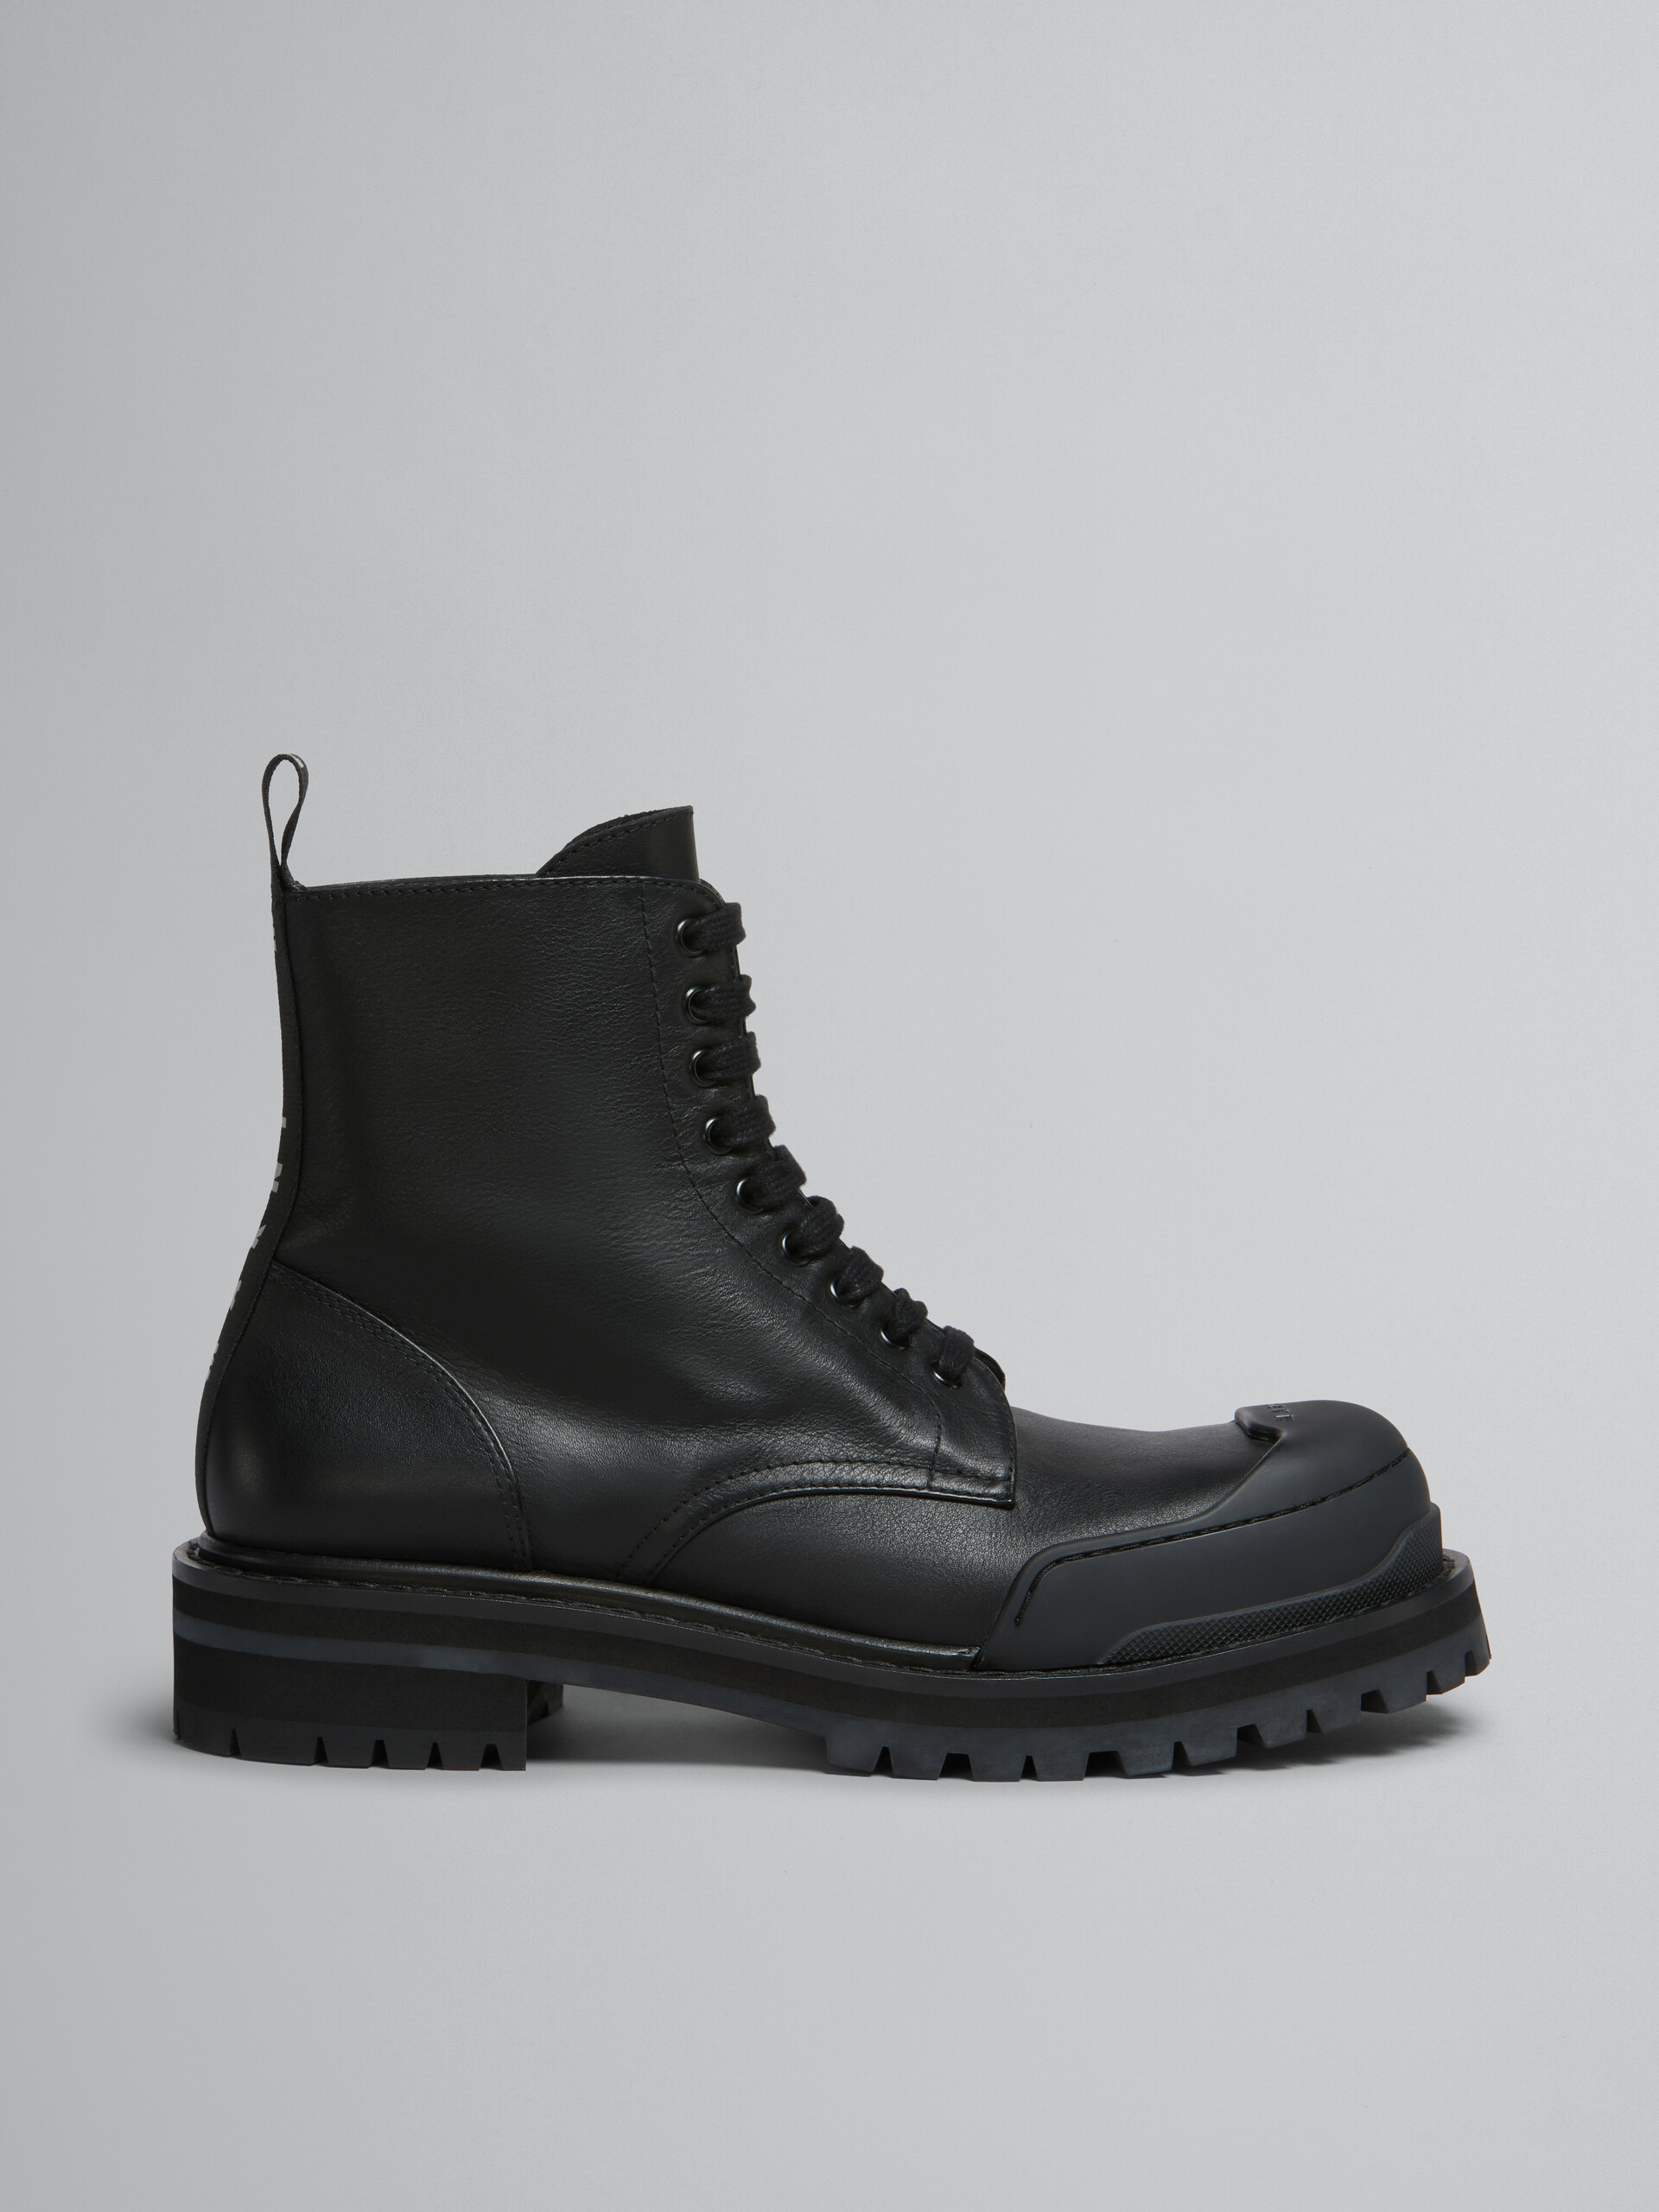 Black leather Dada Army combat boot - Boots - Image 1